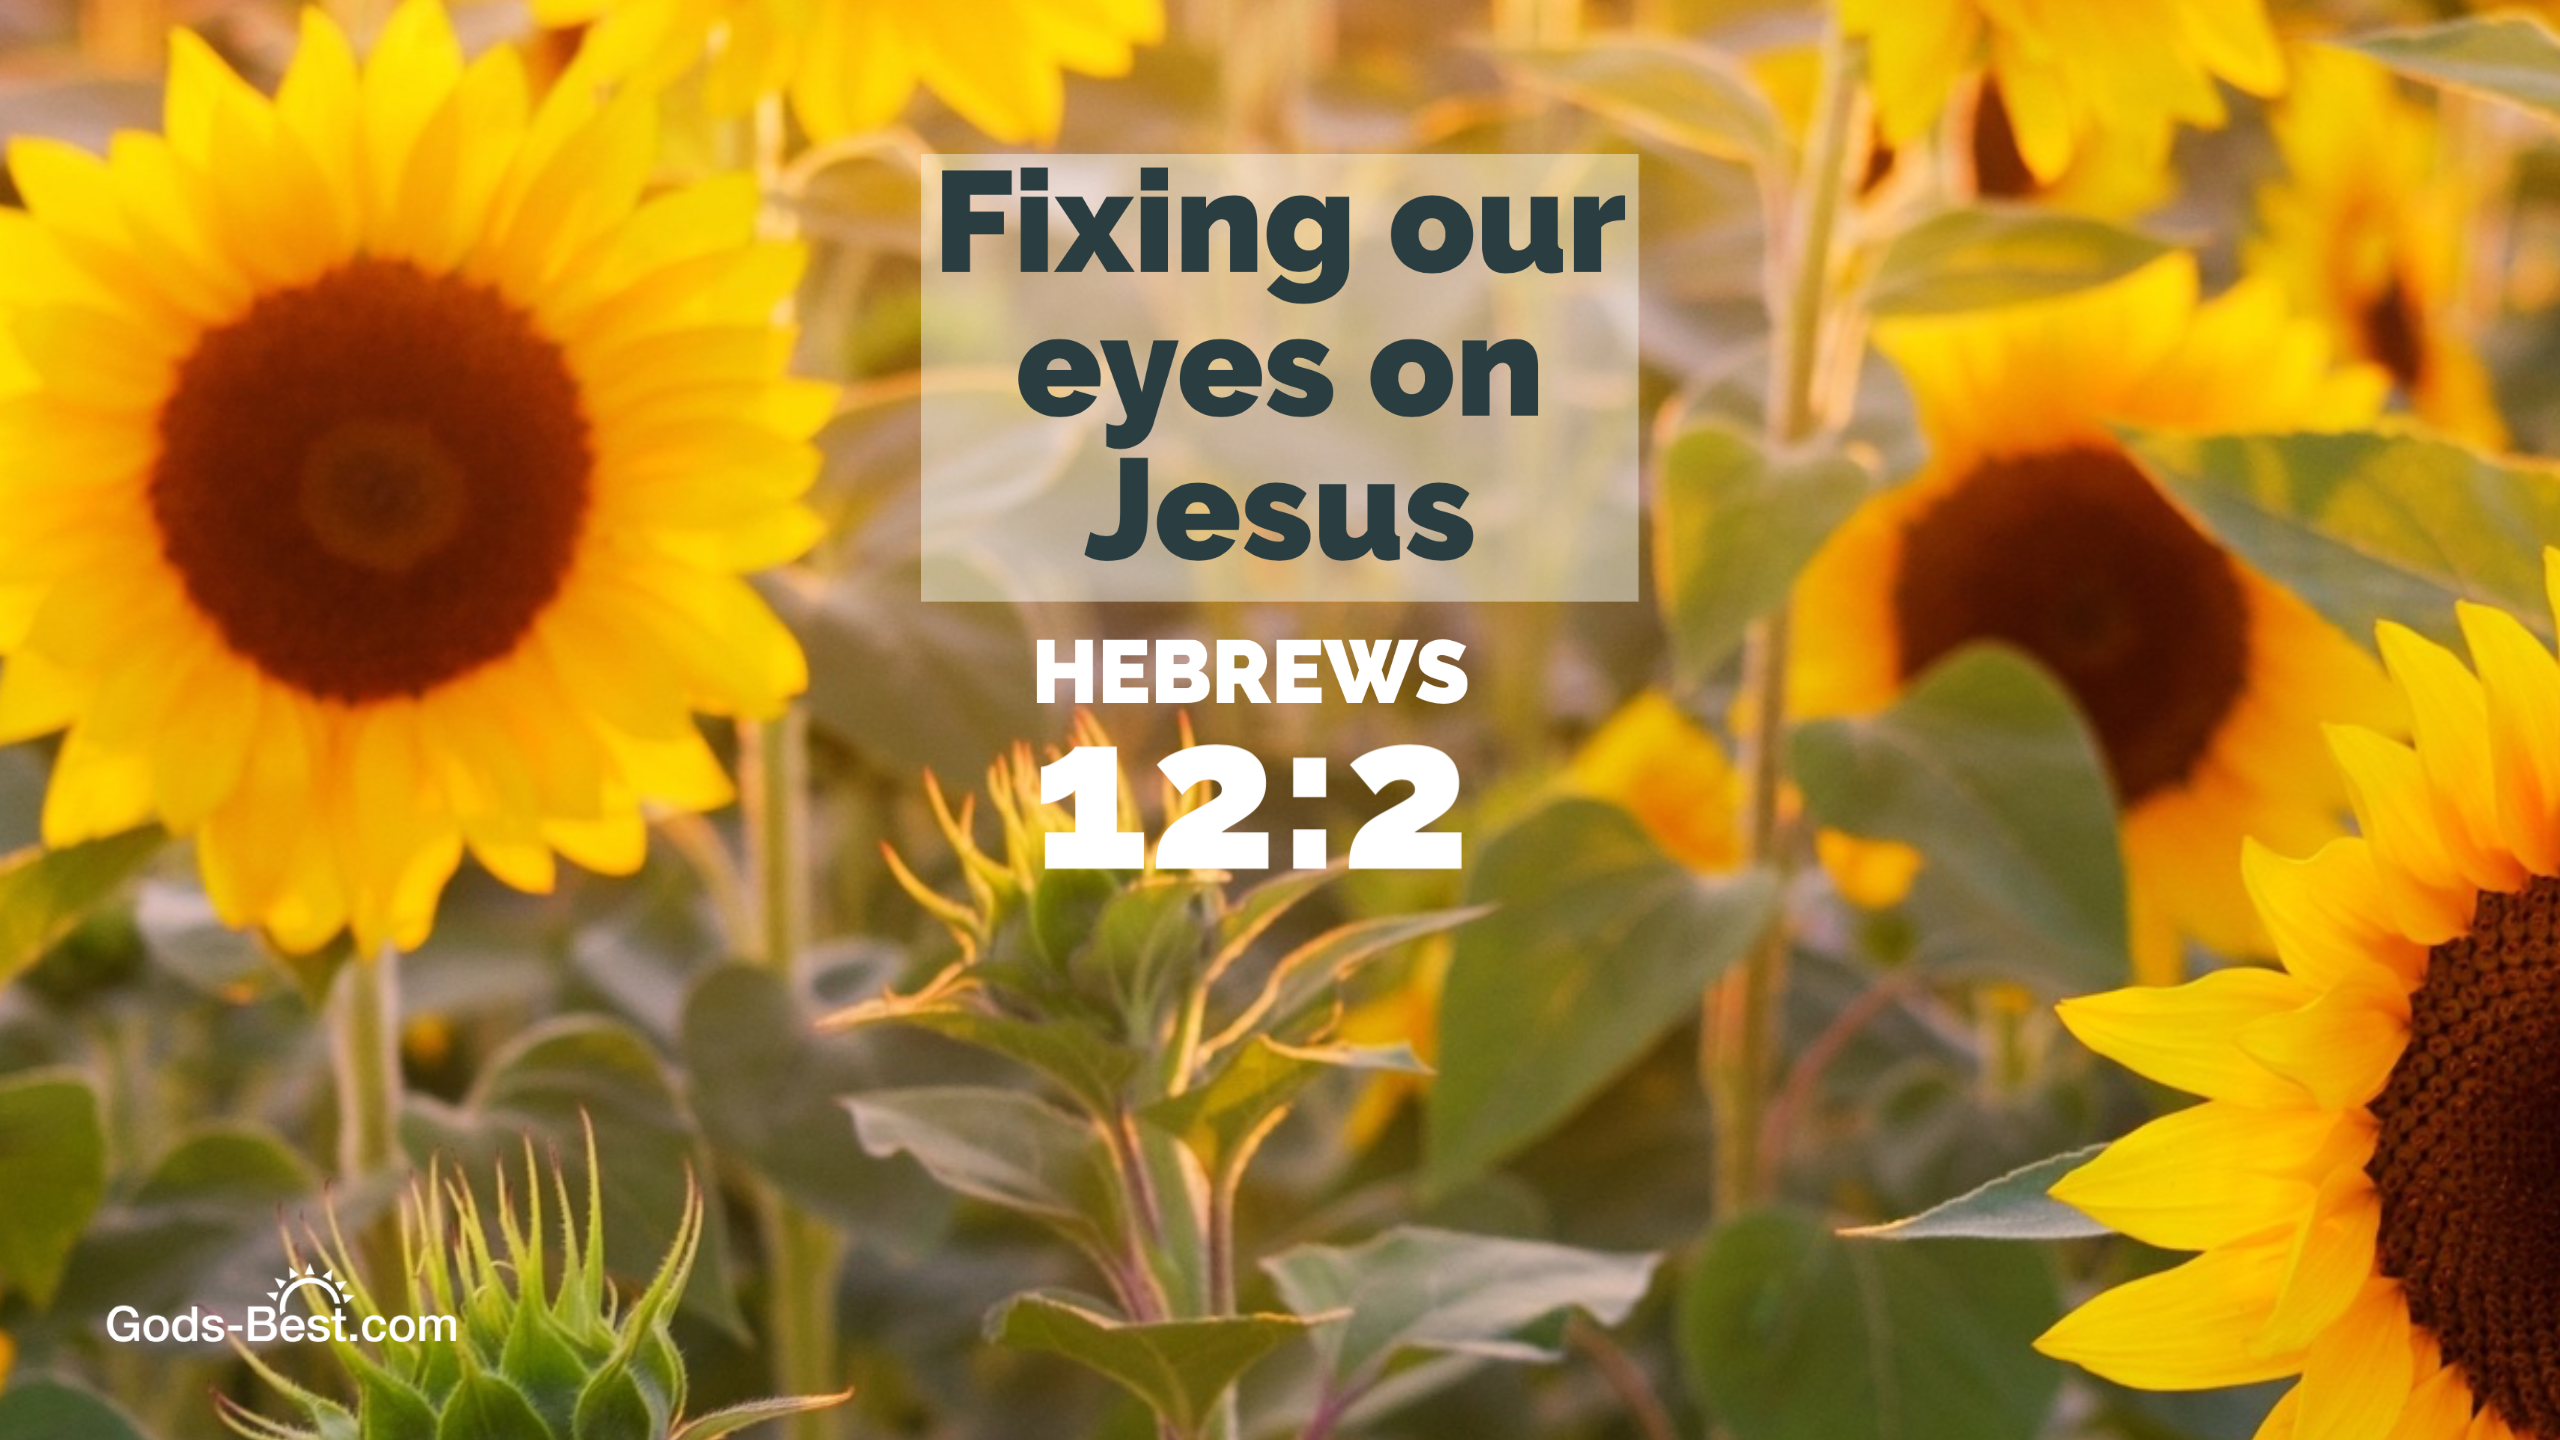 Free Christian wallpaper for your tablet or computer August 2021 Keep our eyes on Jesus Hebrews 12 verse 2